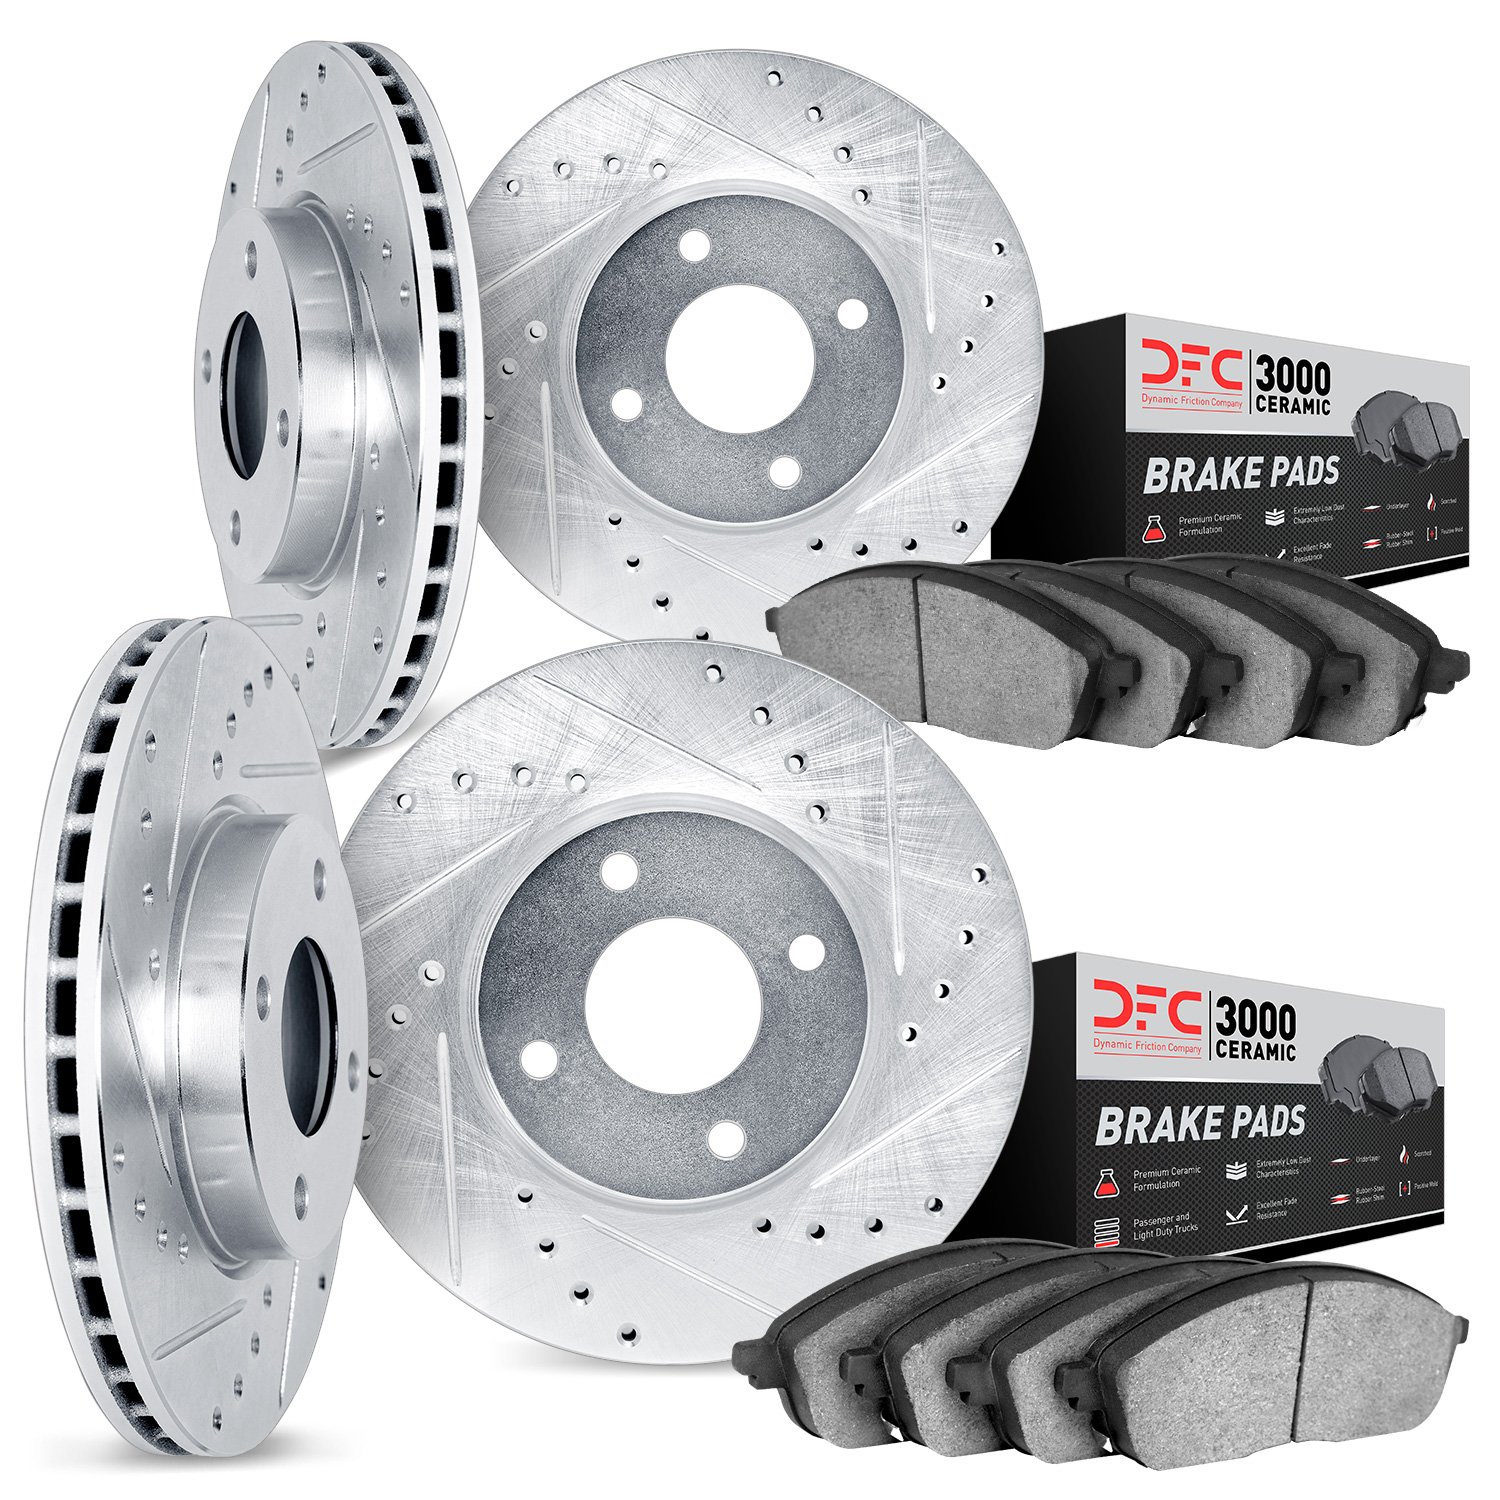 7304-56018 Drilled/Slotted Brake Rotor with 3000-Series Ceramic Brake Pads Kit [Silver], 1998-1999 Ford/Lincoln/Mercury/Mazda, P